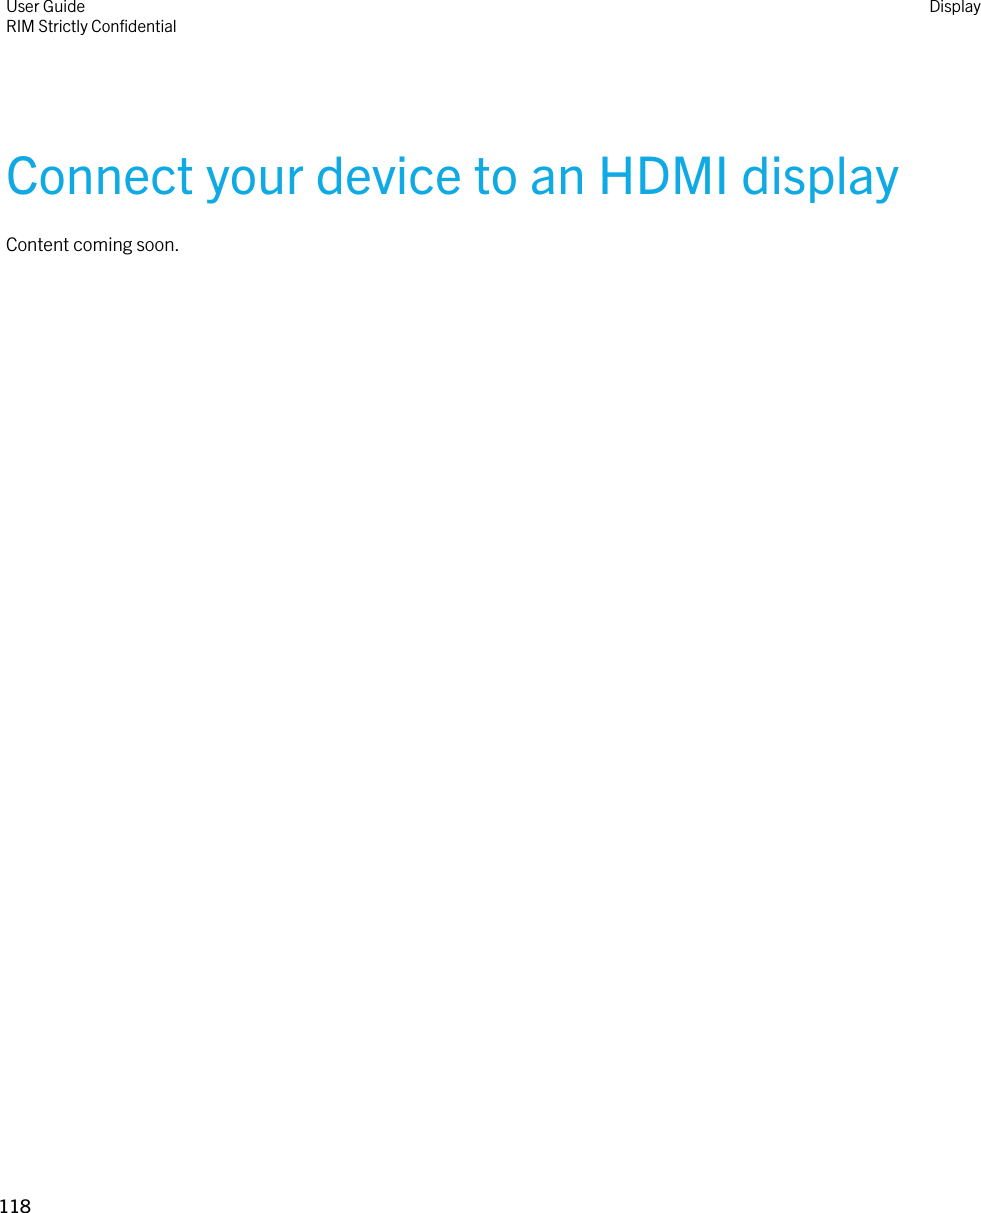 Connect your device to an HDMI displayContent coming soon.User GuideRIM Strictly Confidential Display118 